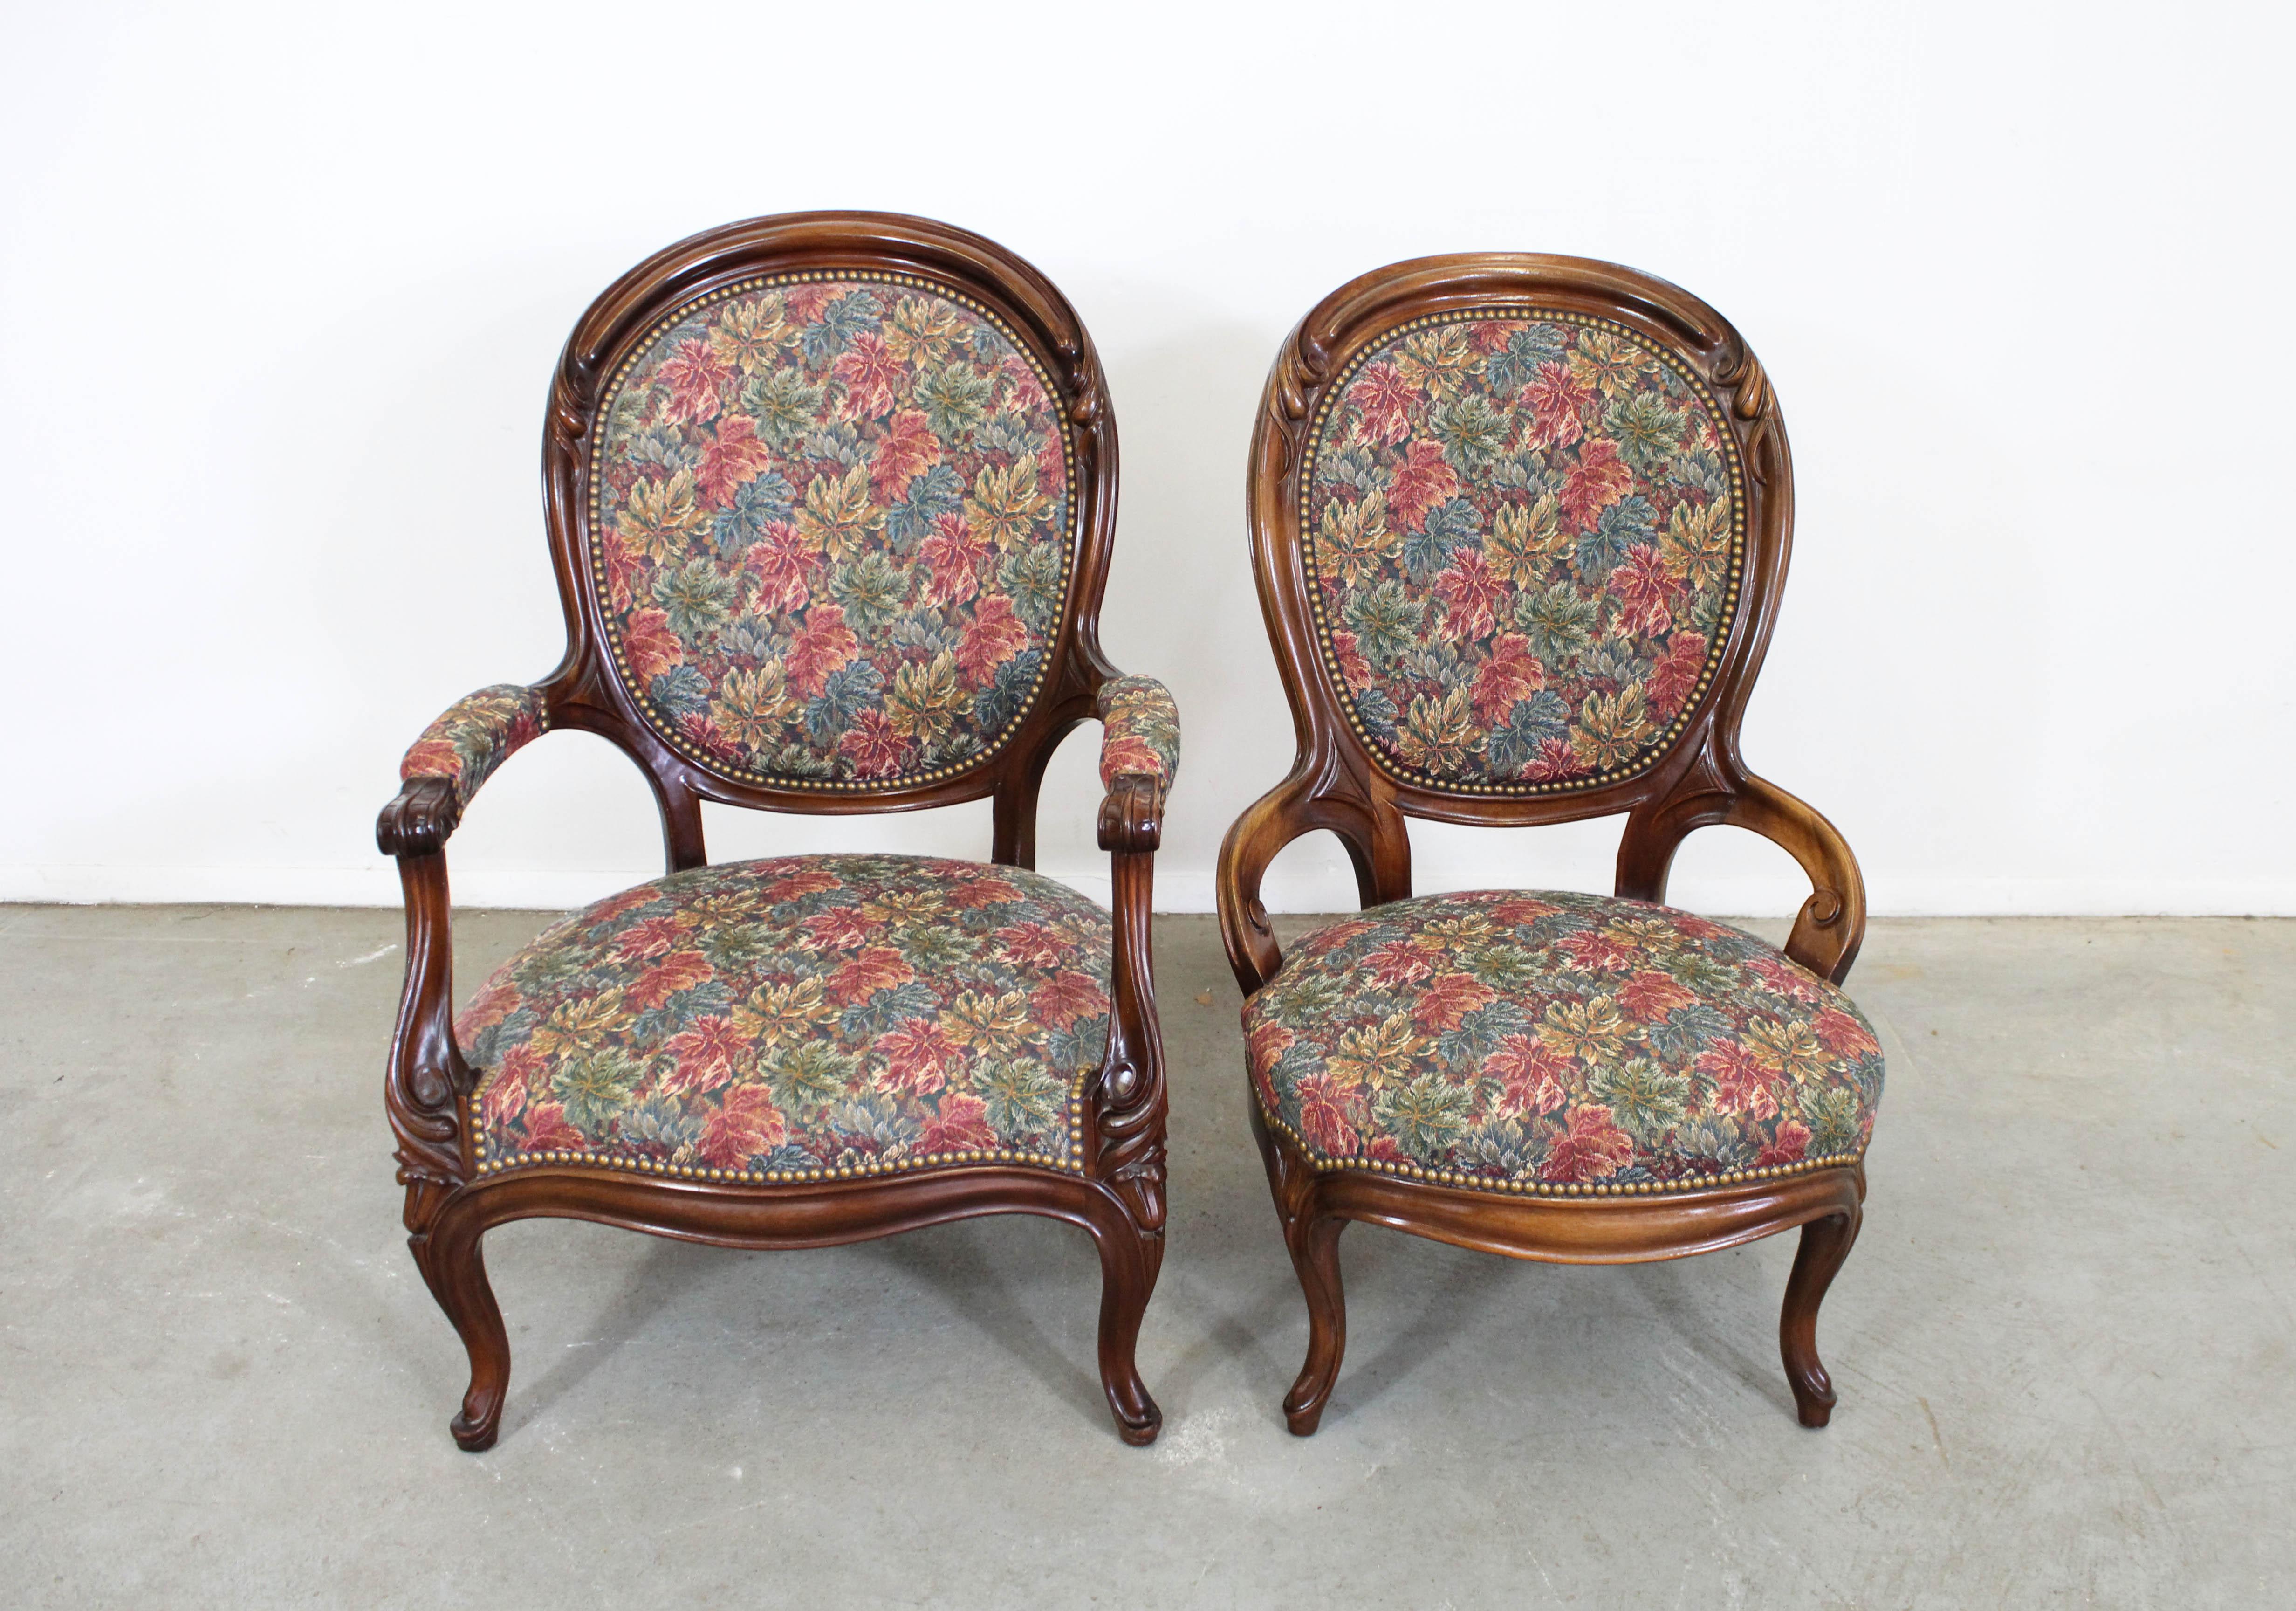 Pair of vintage Victorian parlor set ladies and gentleman chairs.

Offered is a pair of vintage Victorian parlor chairs with carved legs and arms and floral upholstery. Includes a Gentlman's and Lady's chair. They are in good condition with usable